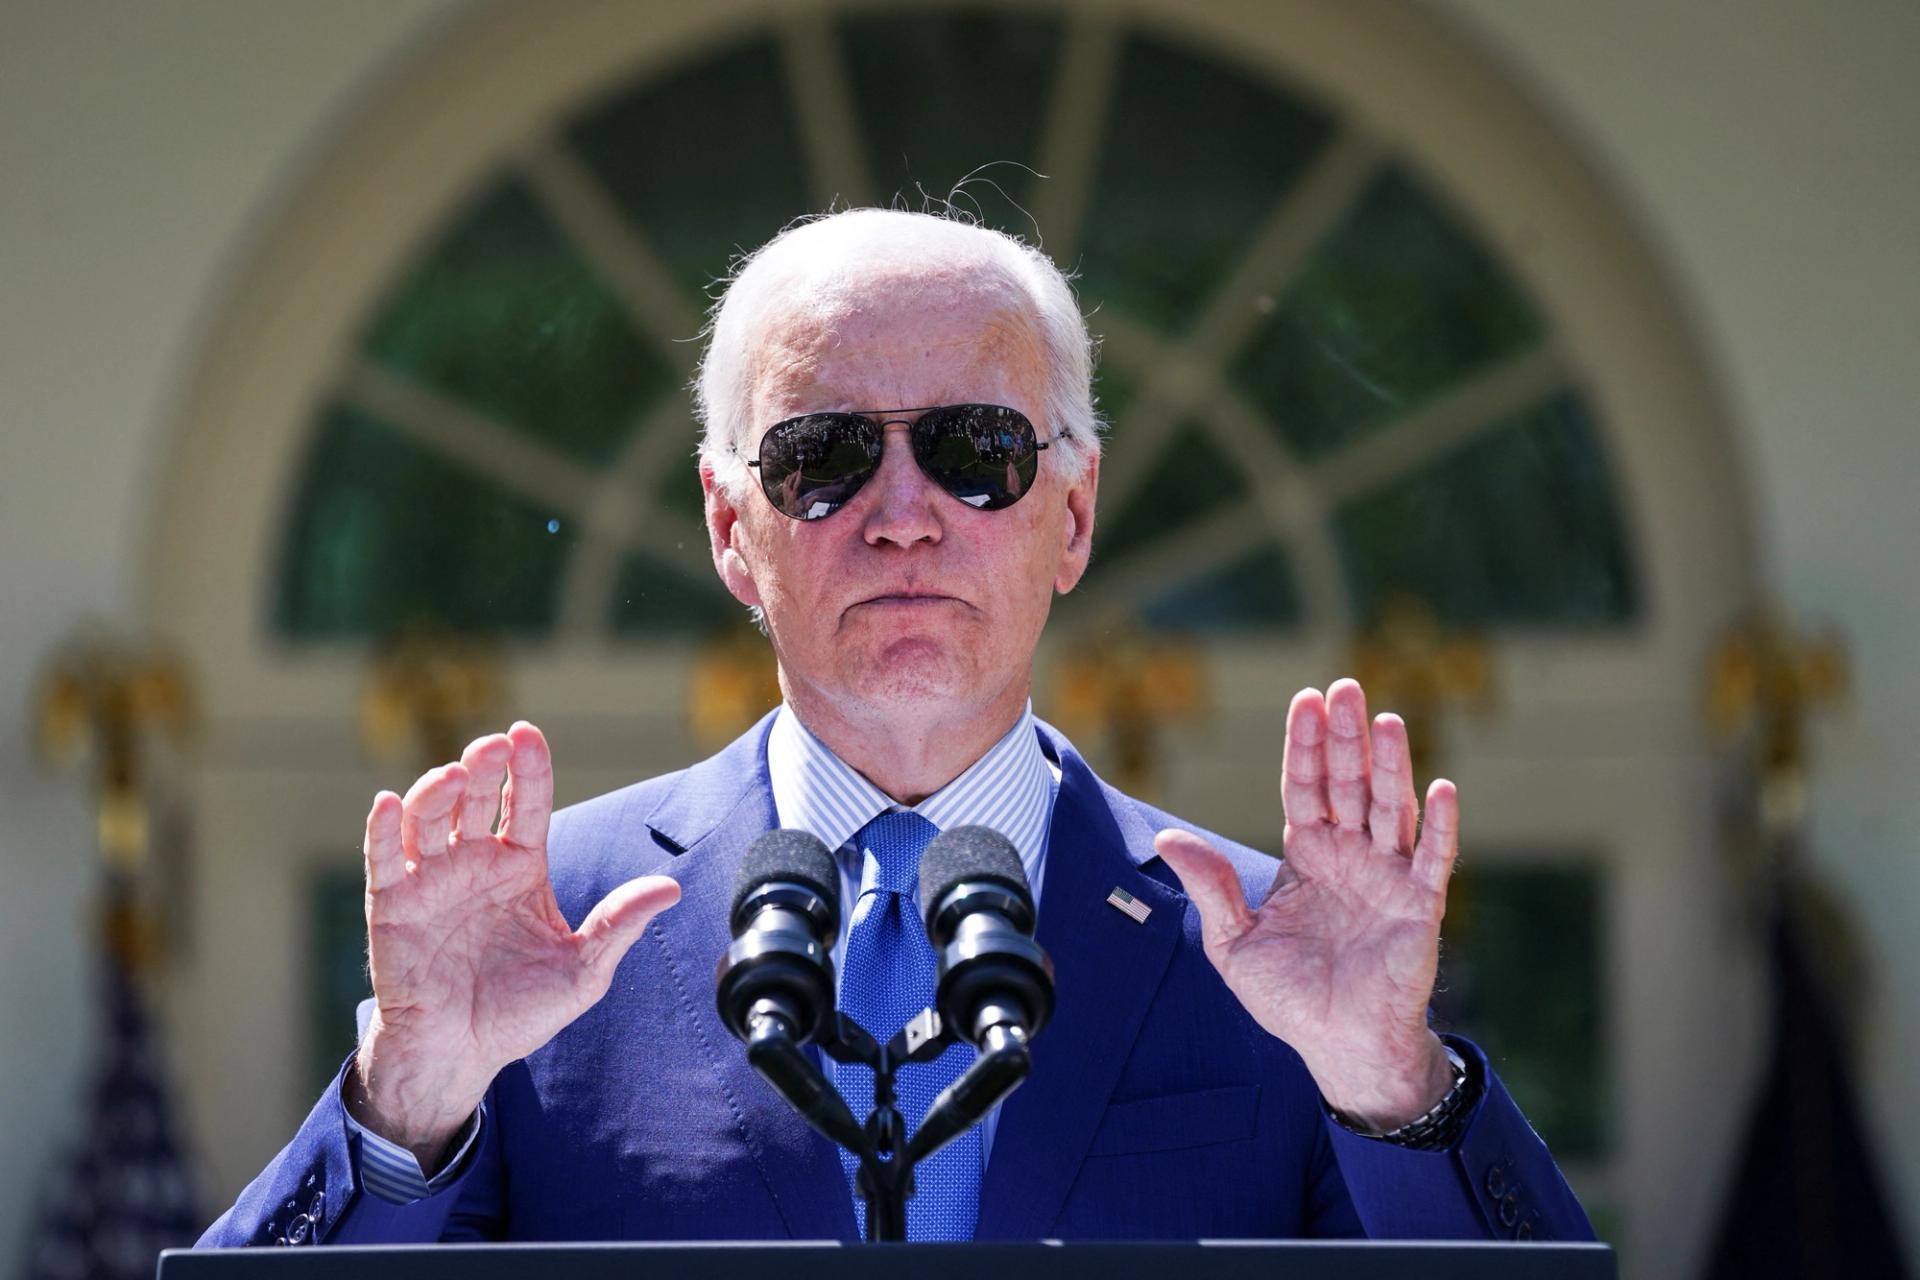 U.S. President Joe Biden delivers remarks on "actions to advance environmental justice" prior to signing an executive order in the Rose Garden at the White House in Washington, U.S., April 21, 2023. REUTERS/Kevin Lamarque